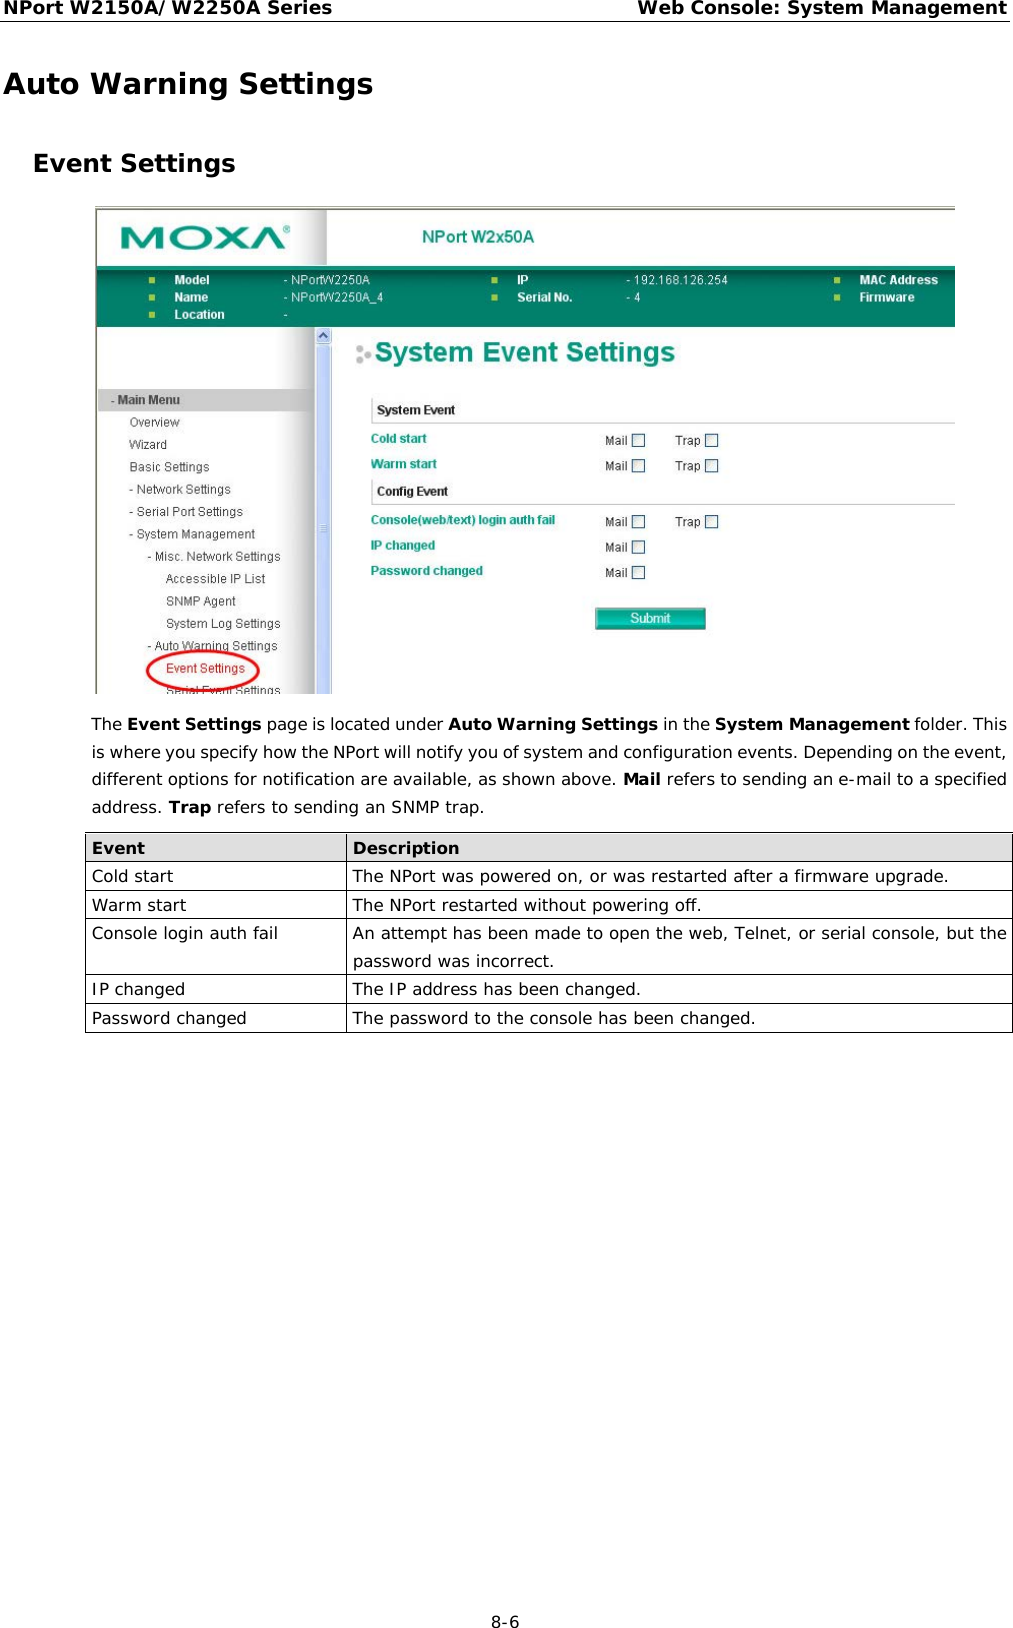 NPort W2150A/W2250A Series Web Console: System Management  8-6 Auto Warning Settings Event Settings  The Event Settings page is located under Auto Warning Settings in the System Management folder. This is where you specify how the NPort will notify you of system and configuration events. Depending on the event, different options for notification are available, as shown above. Mail refers to sending an e-mail to a specified address. Trap refers to sending an SNMP trap. Event Description Cold start The NPort was powered on, or was restarted after a firmware upgrade. Warm start The NPort restarted without powering off. Console login auth fail An attempt has been made to open the web, Telnet, or serial console, but the password was incorrect. IP changed The IP address has been changed. Password changed The password to the console has been changed. 